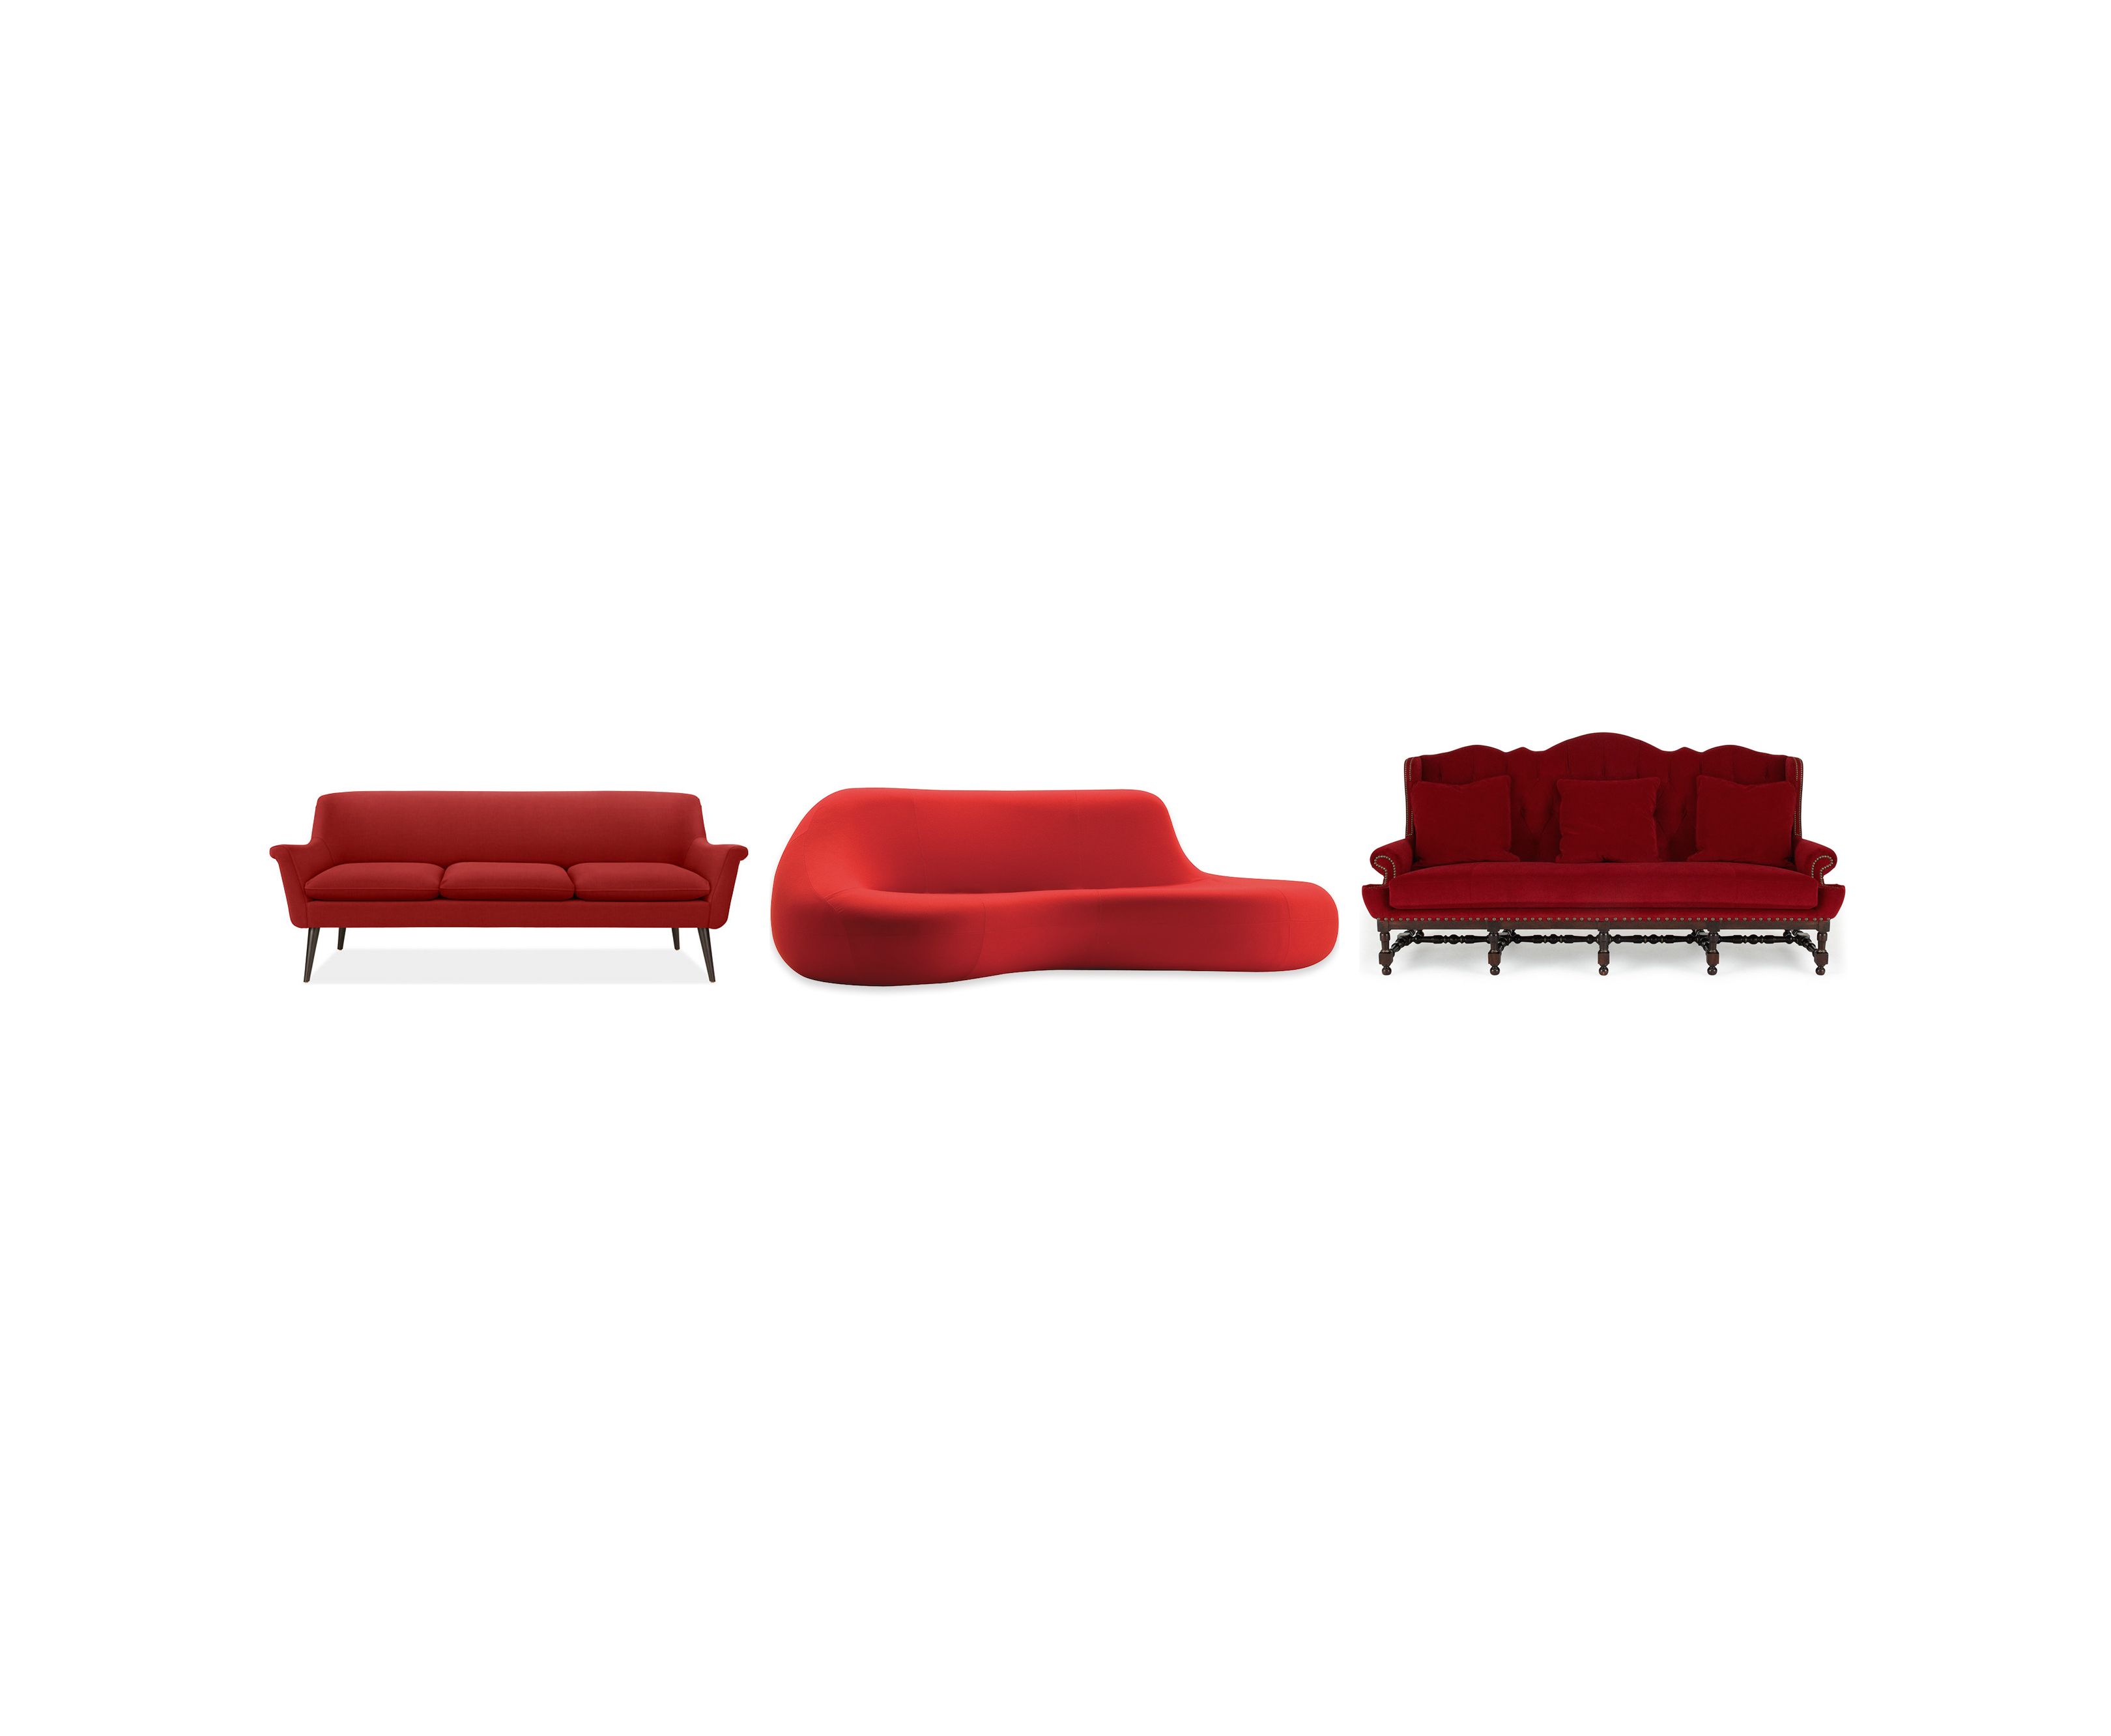 20 Best Red Couch Ideas Sofas, Living Room With Red Couch Pictures